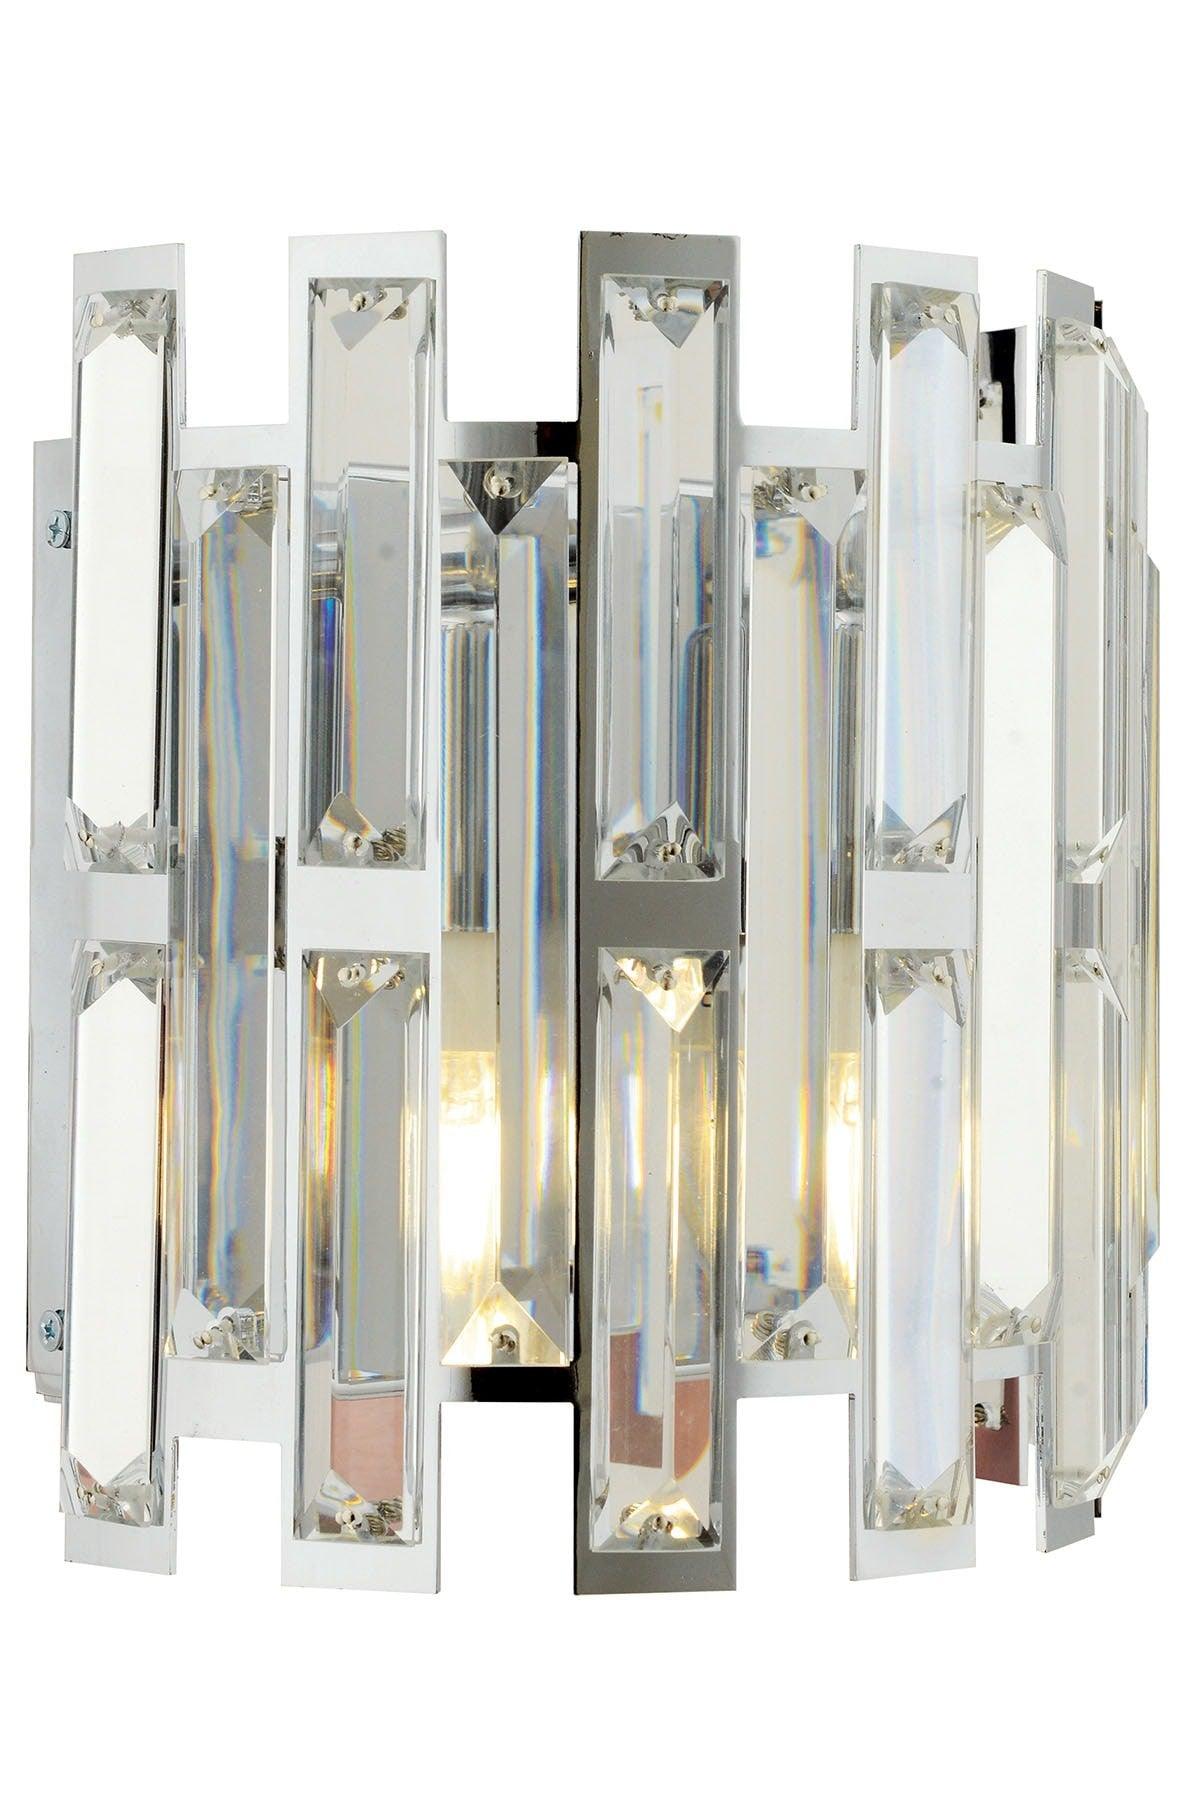 Galliano Chrome Plated Crystal Stone Wall Lamp for Bedroom-Bedhead-Living Room Sconce - Swordslife